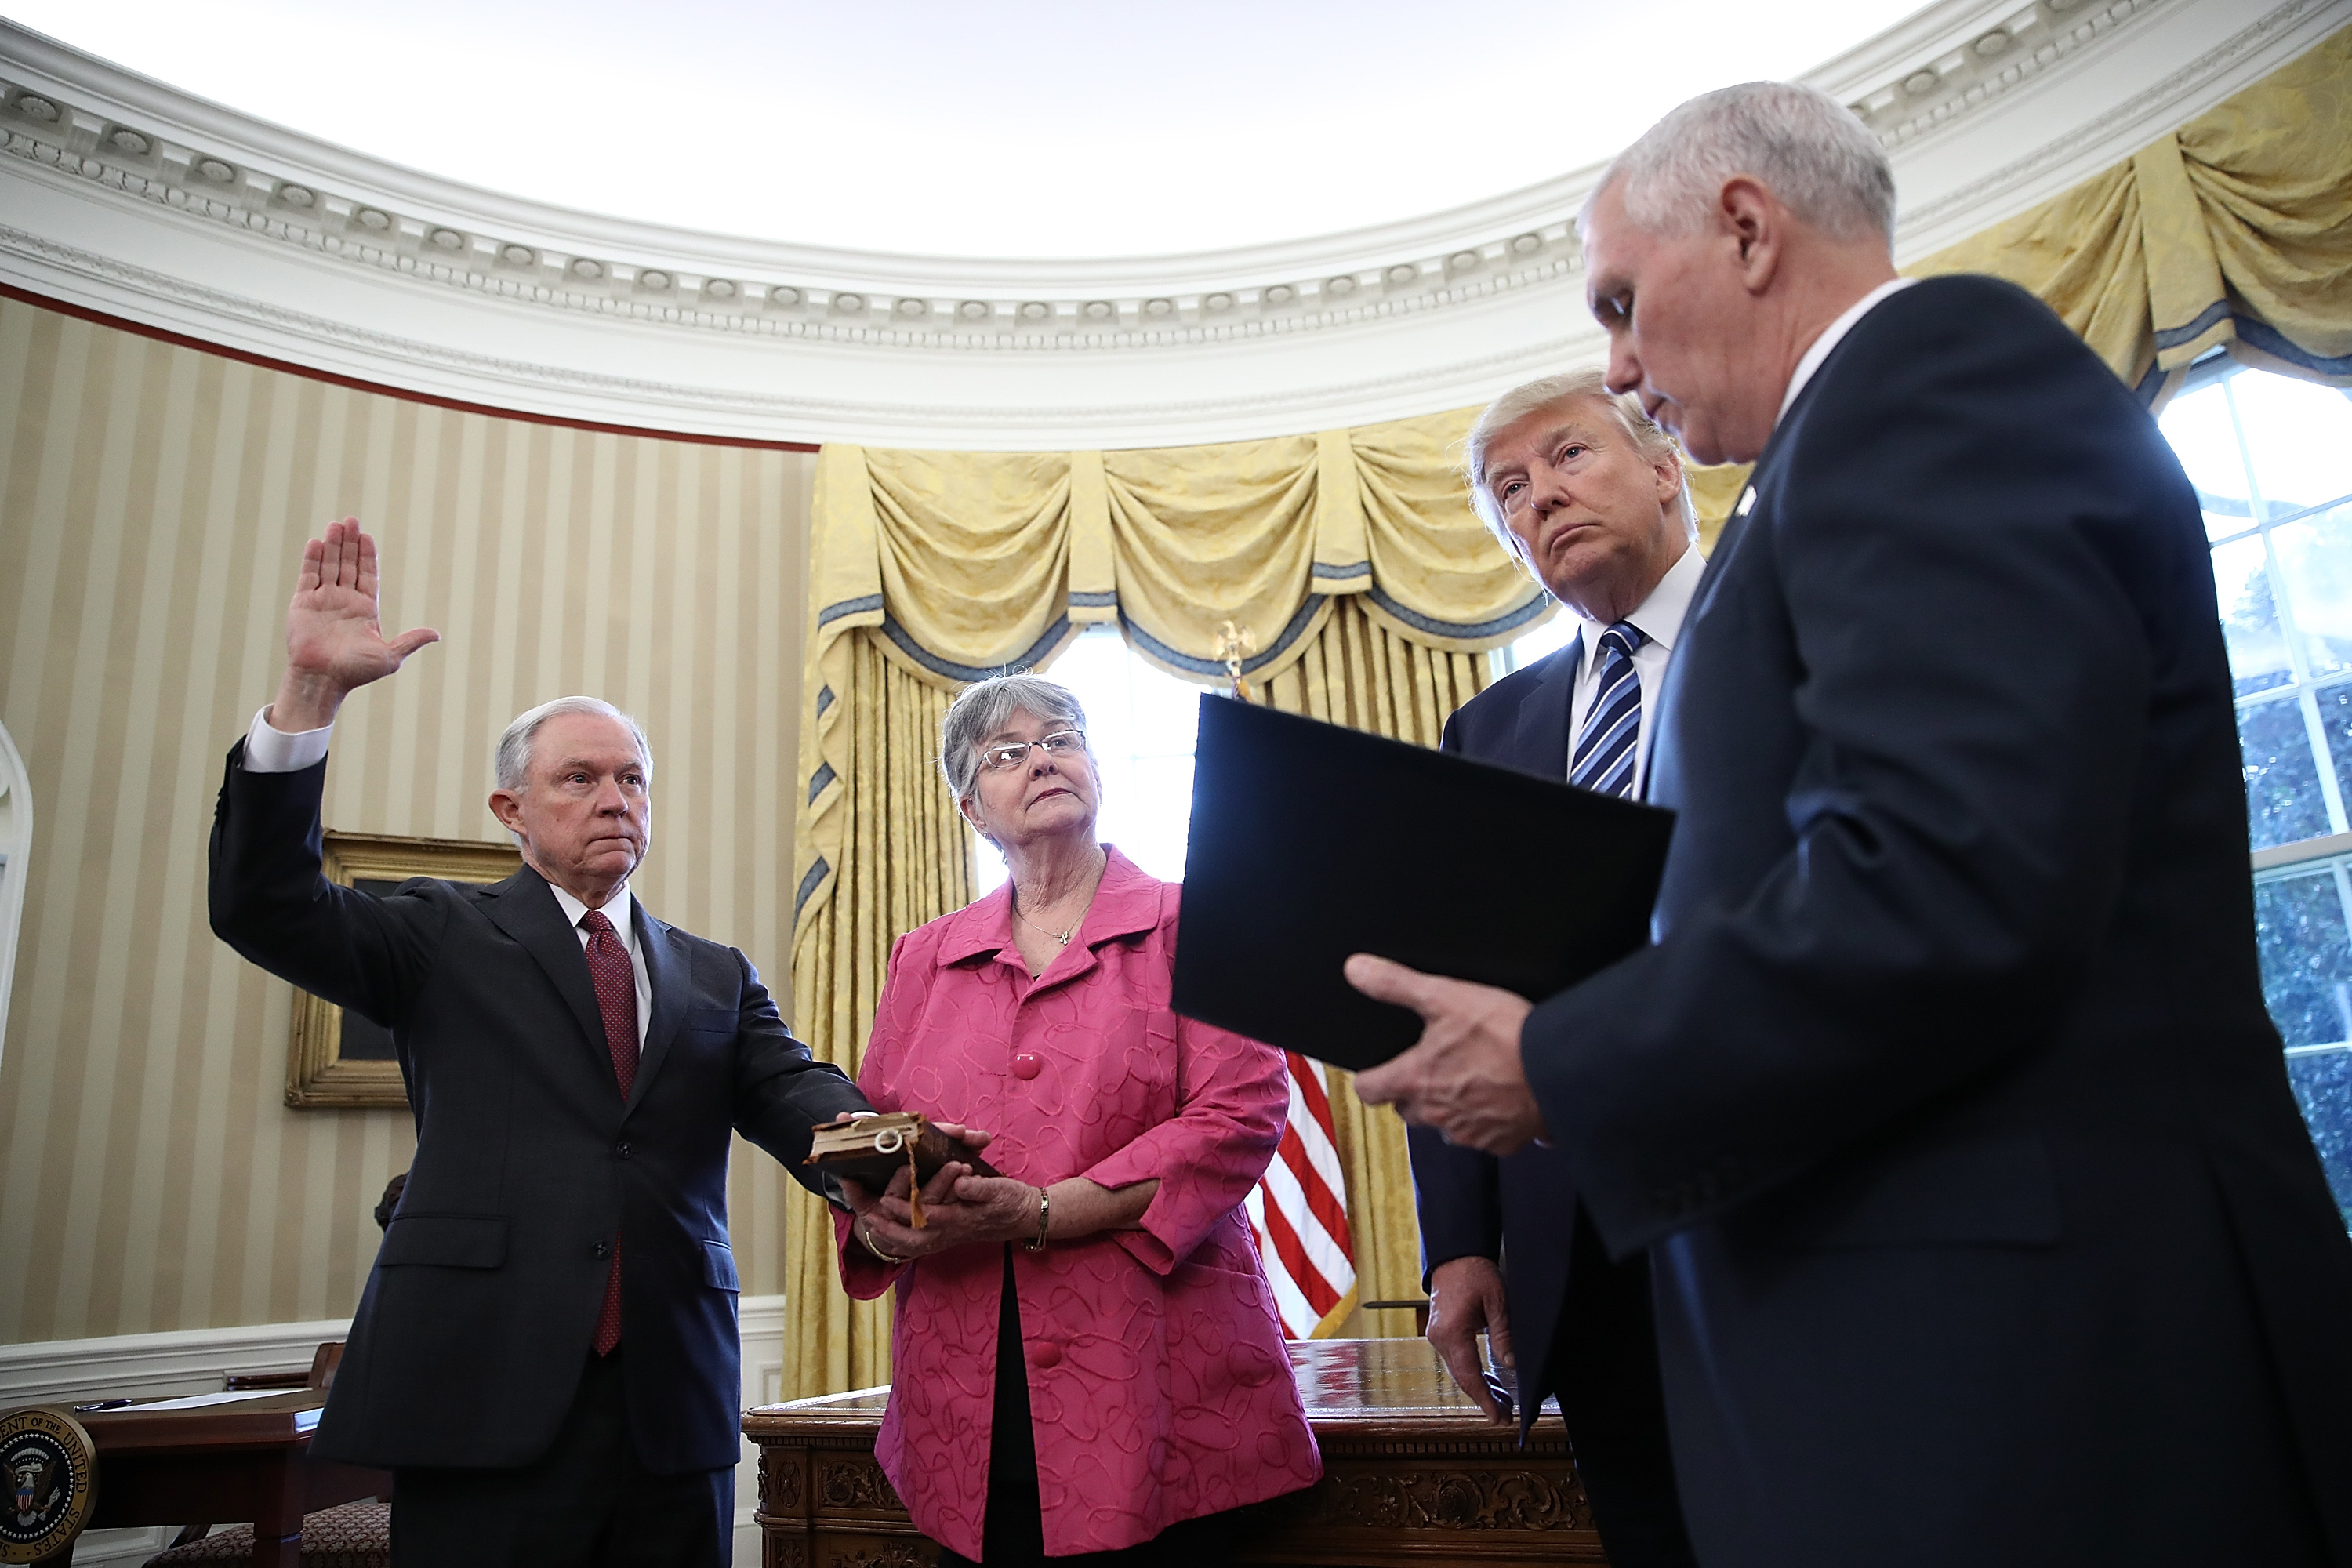 U.S. President Donald Trump (2nd R) watches as Jeff Sessions (L) is sworn in as the new U.S. Attorney General by U.S. Vice President Mike Pence (R) in the Oval Office of the White House on Feb. 9, 2017, in Washington, D.C. (Win McNamee&mdash;Getty Images)